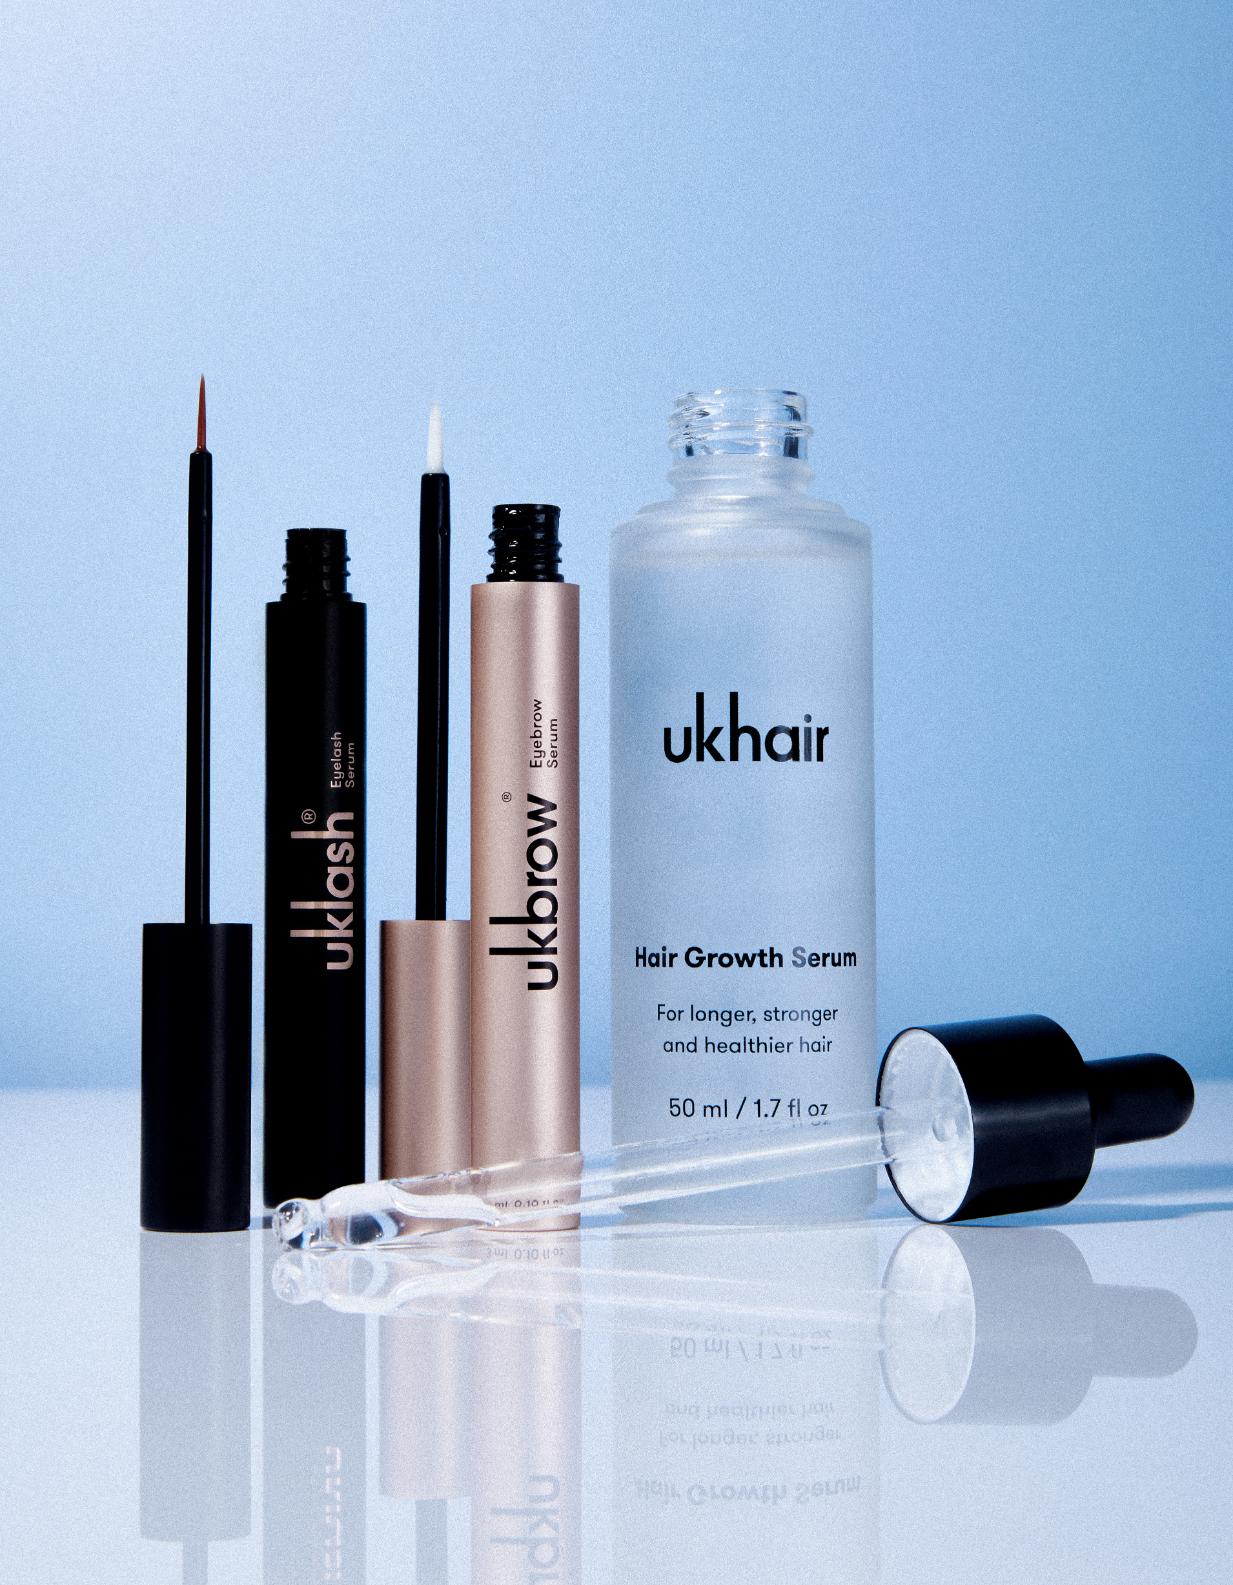 3 Steps To Longer Lashes, Brows & Hair With Our Super Serums - UKLASH